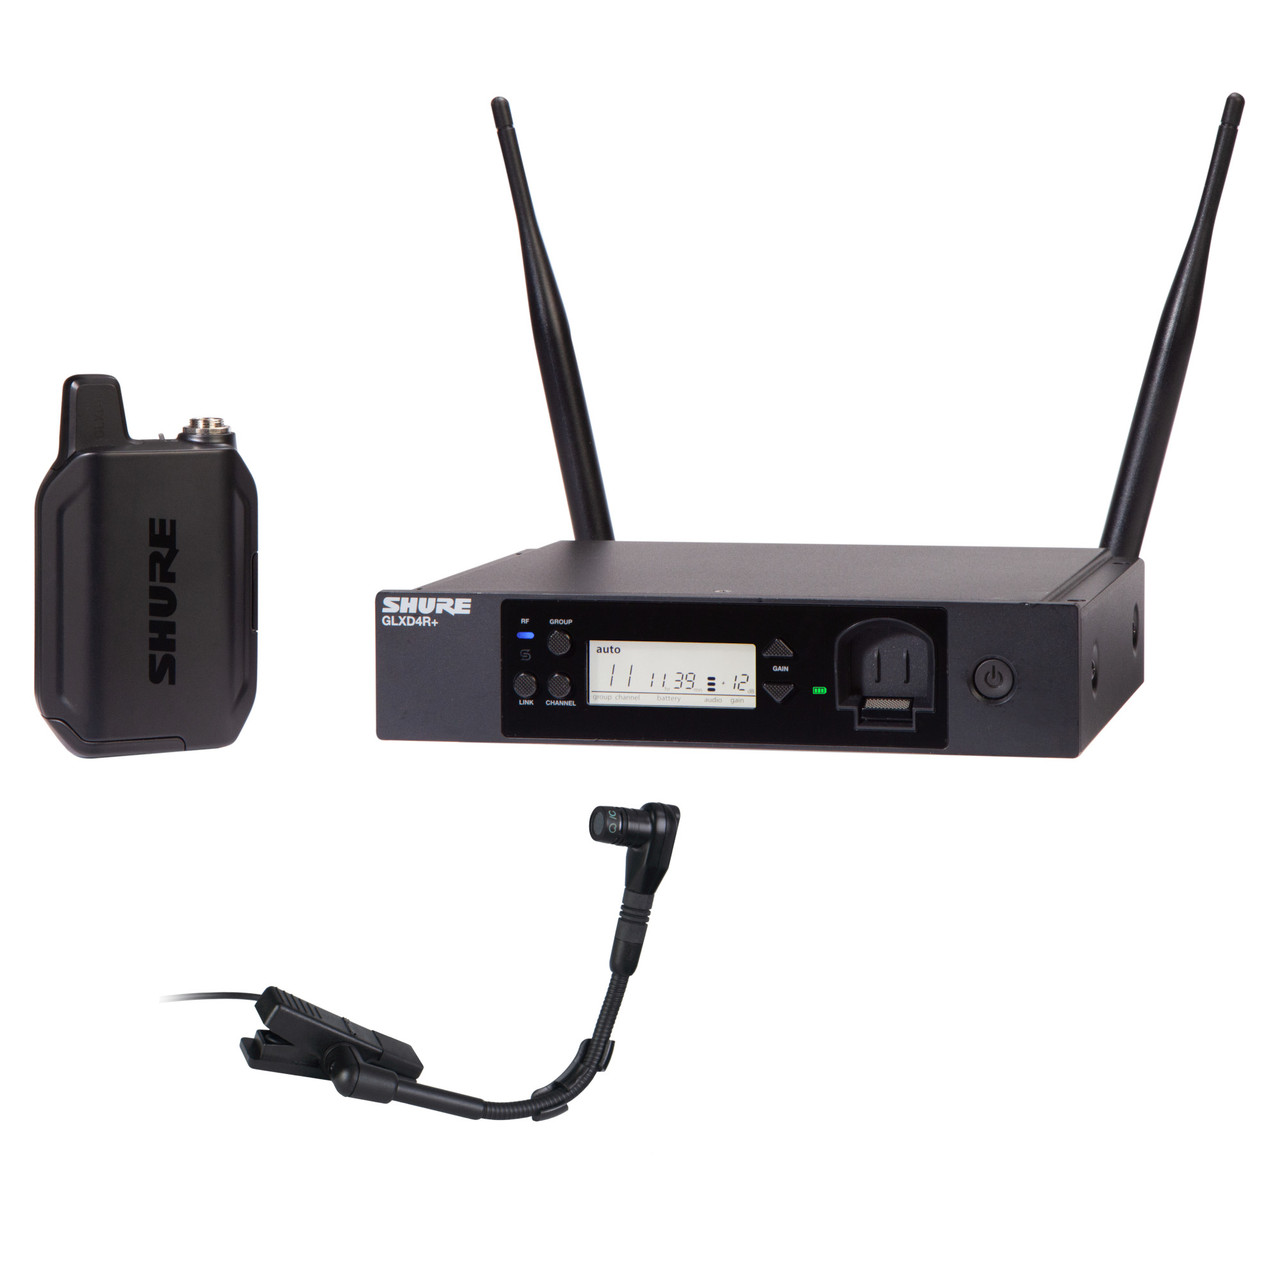 Getting Started with GLX-D Digital Wireless – Part 3: Adjusting